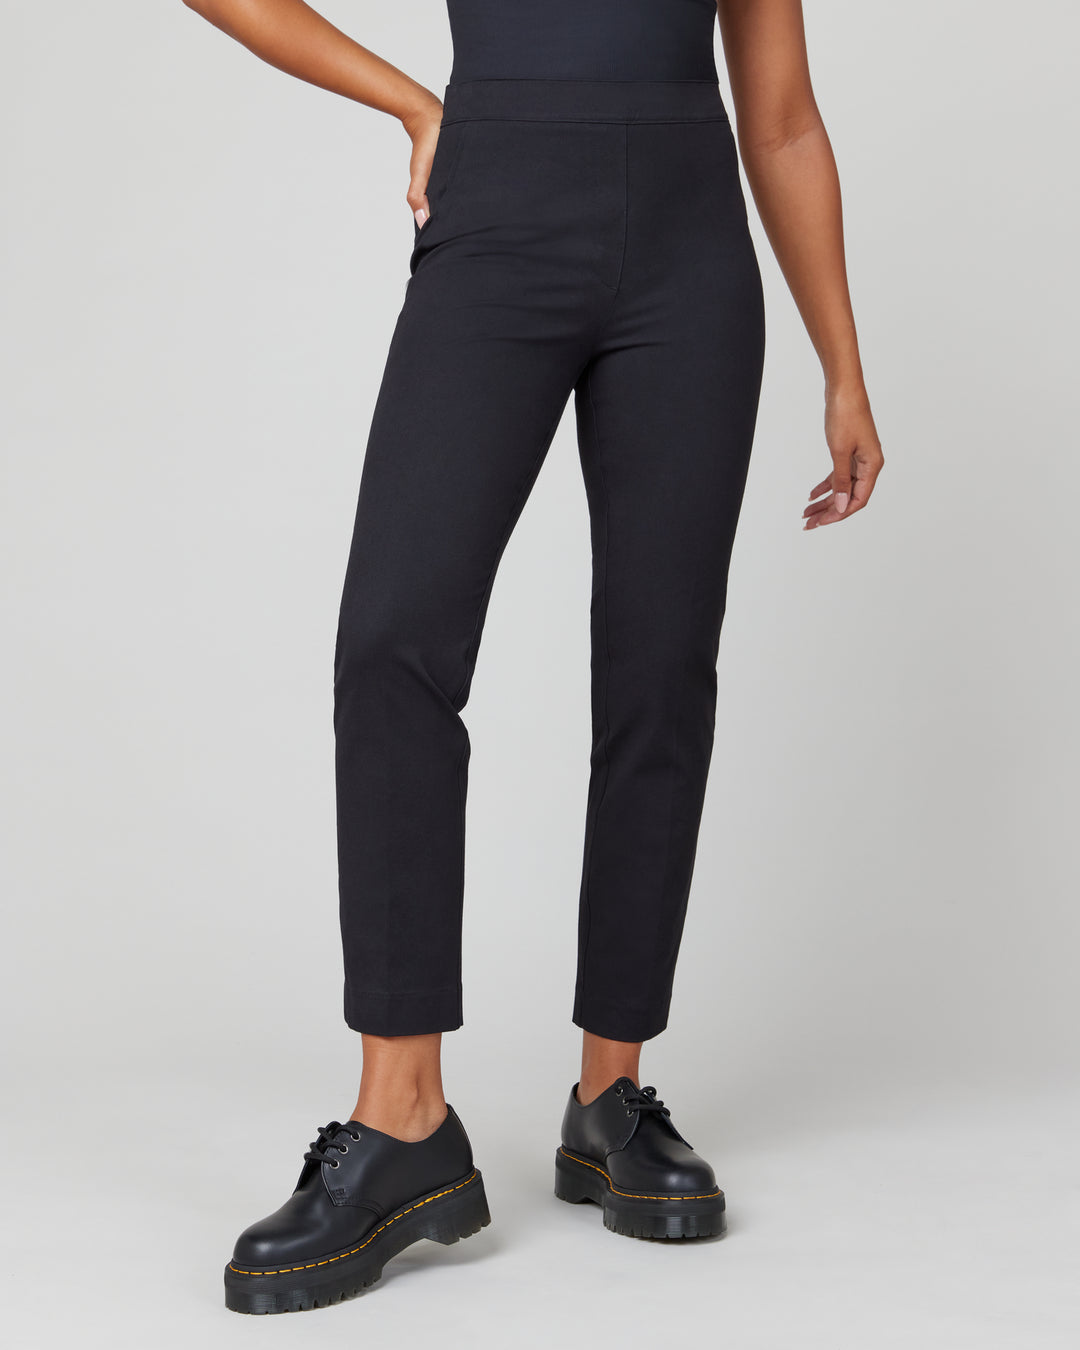 SPANX ON-THE-GO ANKLE SLIM STRAIGHT PANT - CLASSIC BLACK